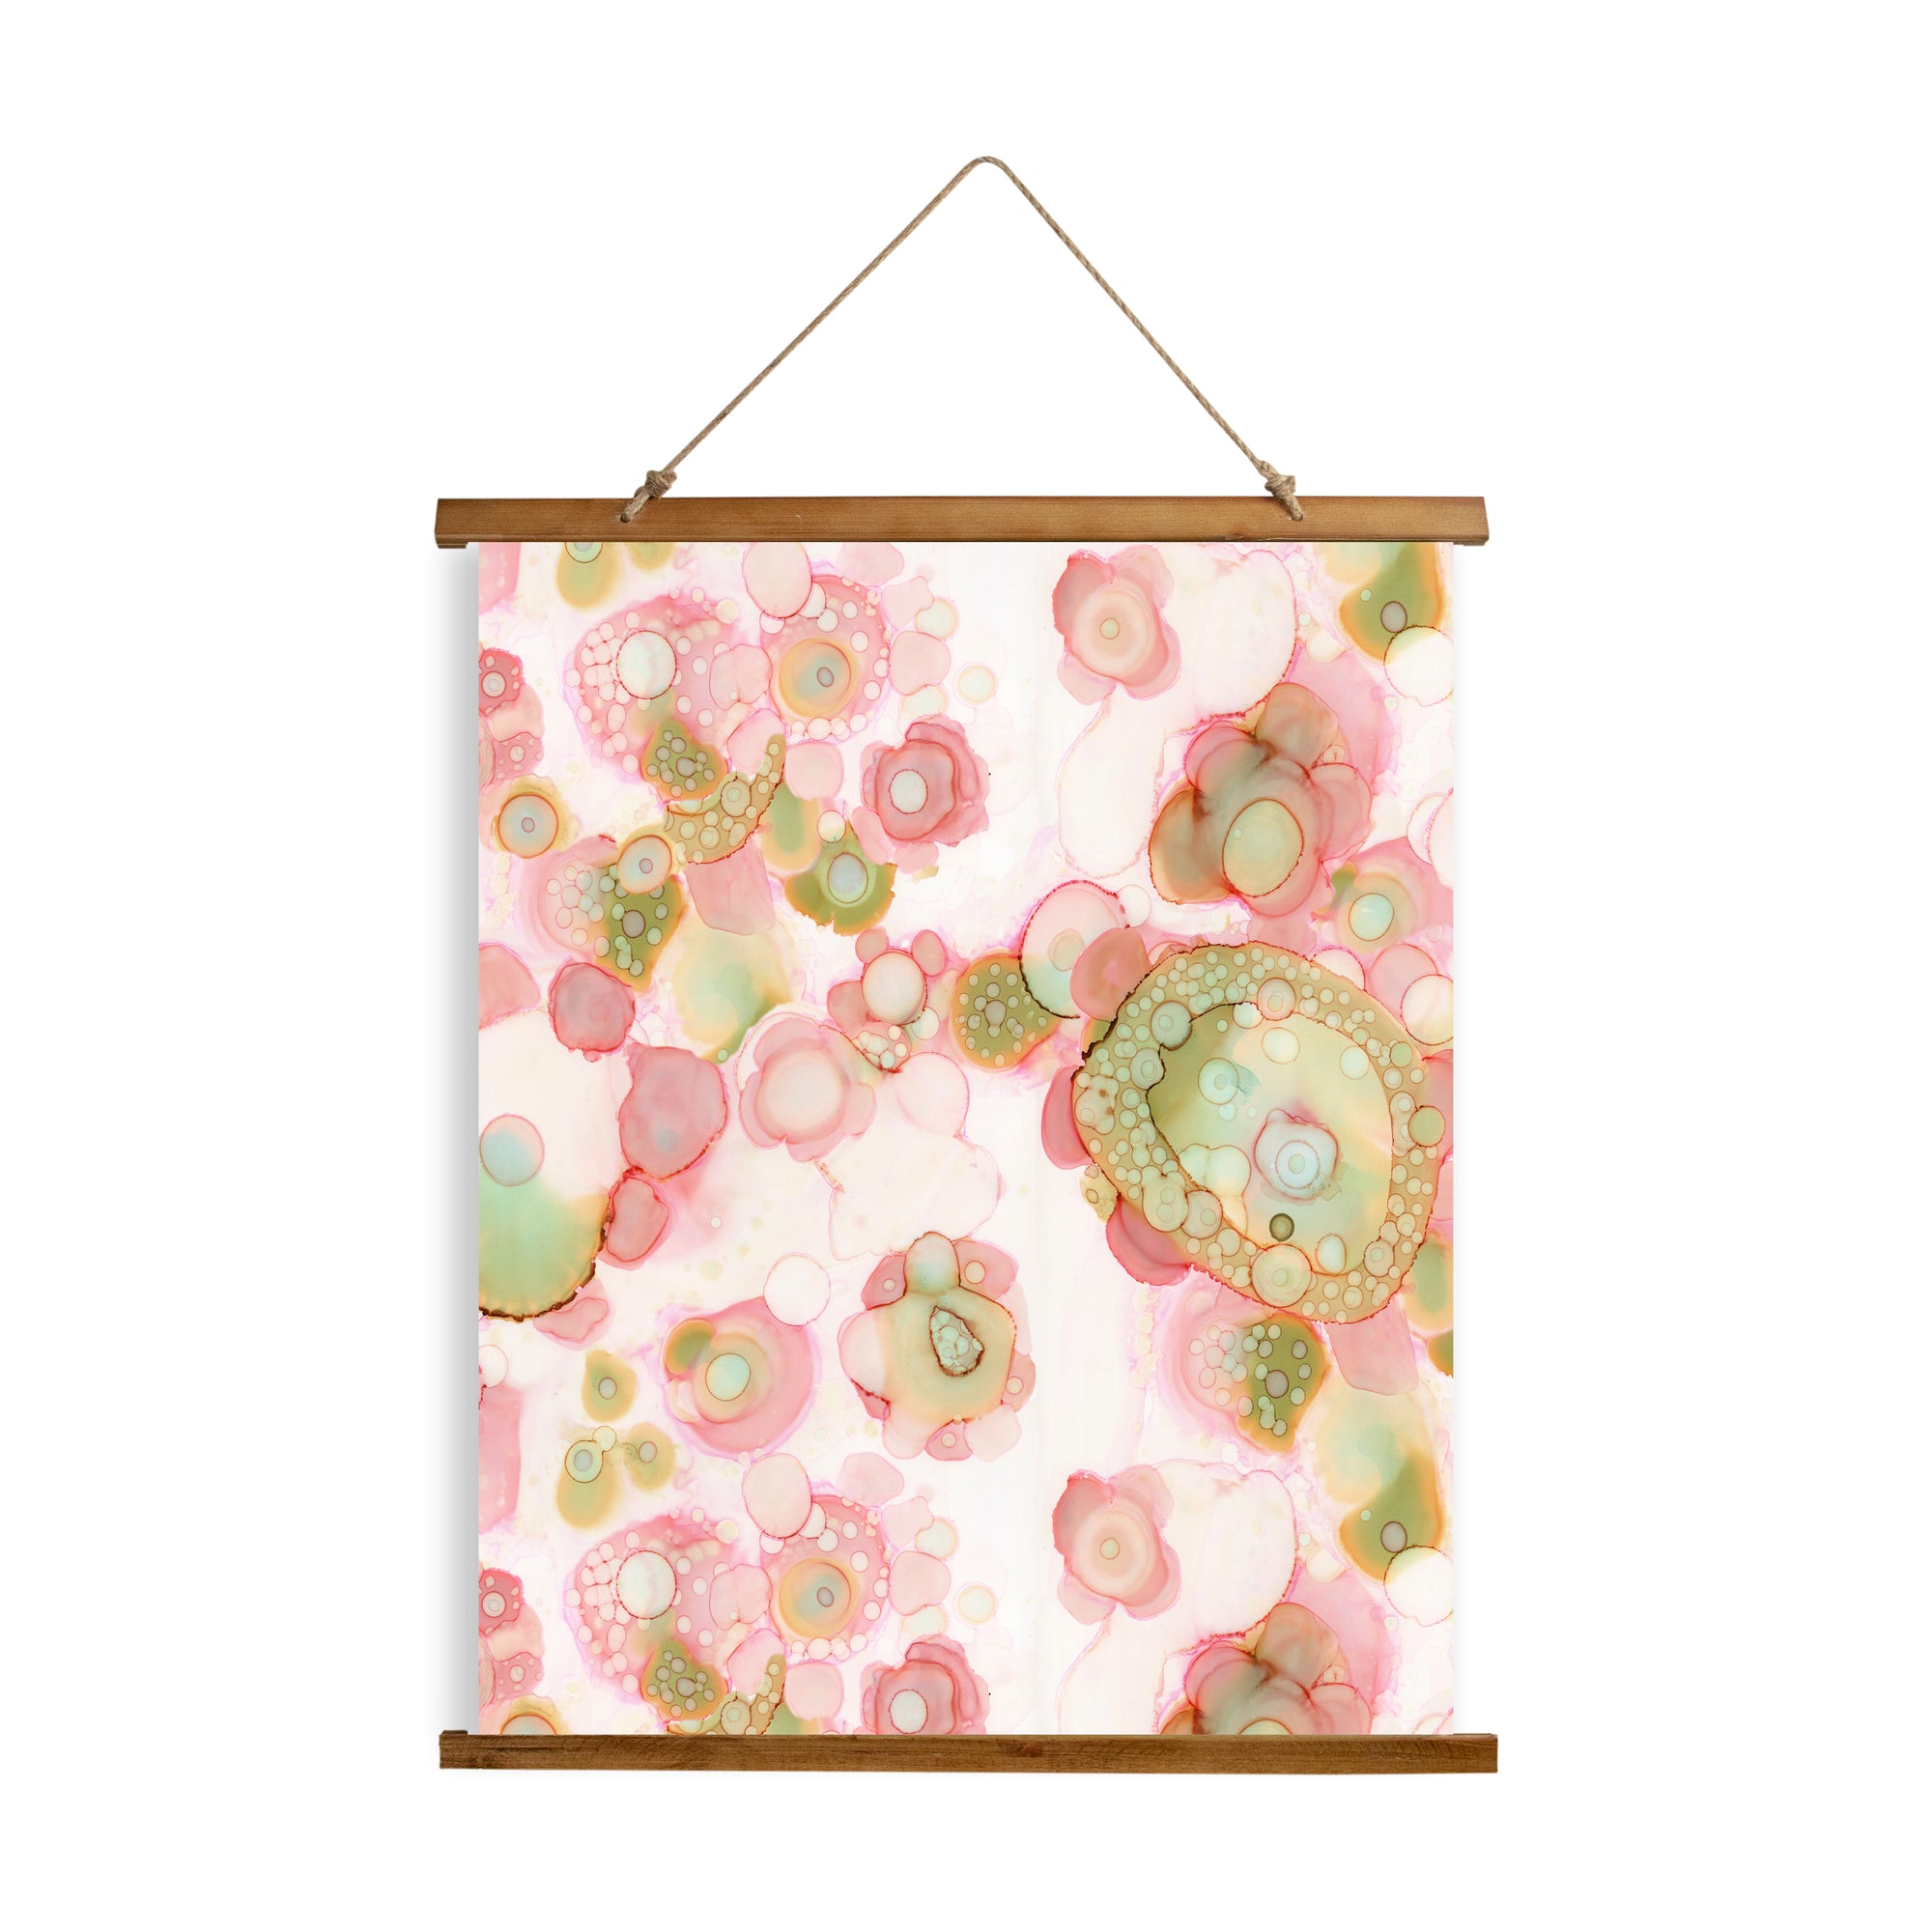 Whimsical Wood Slat Tapestry "Organic in Pink"